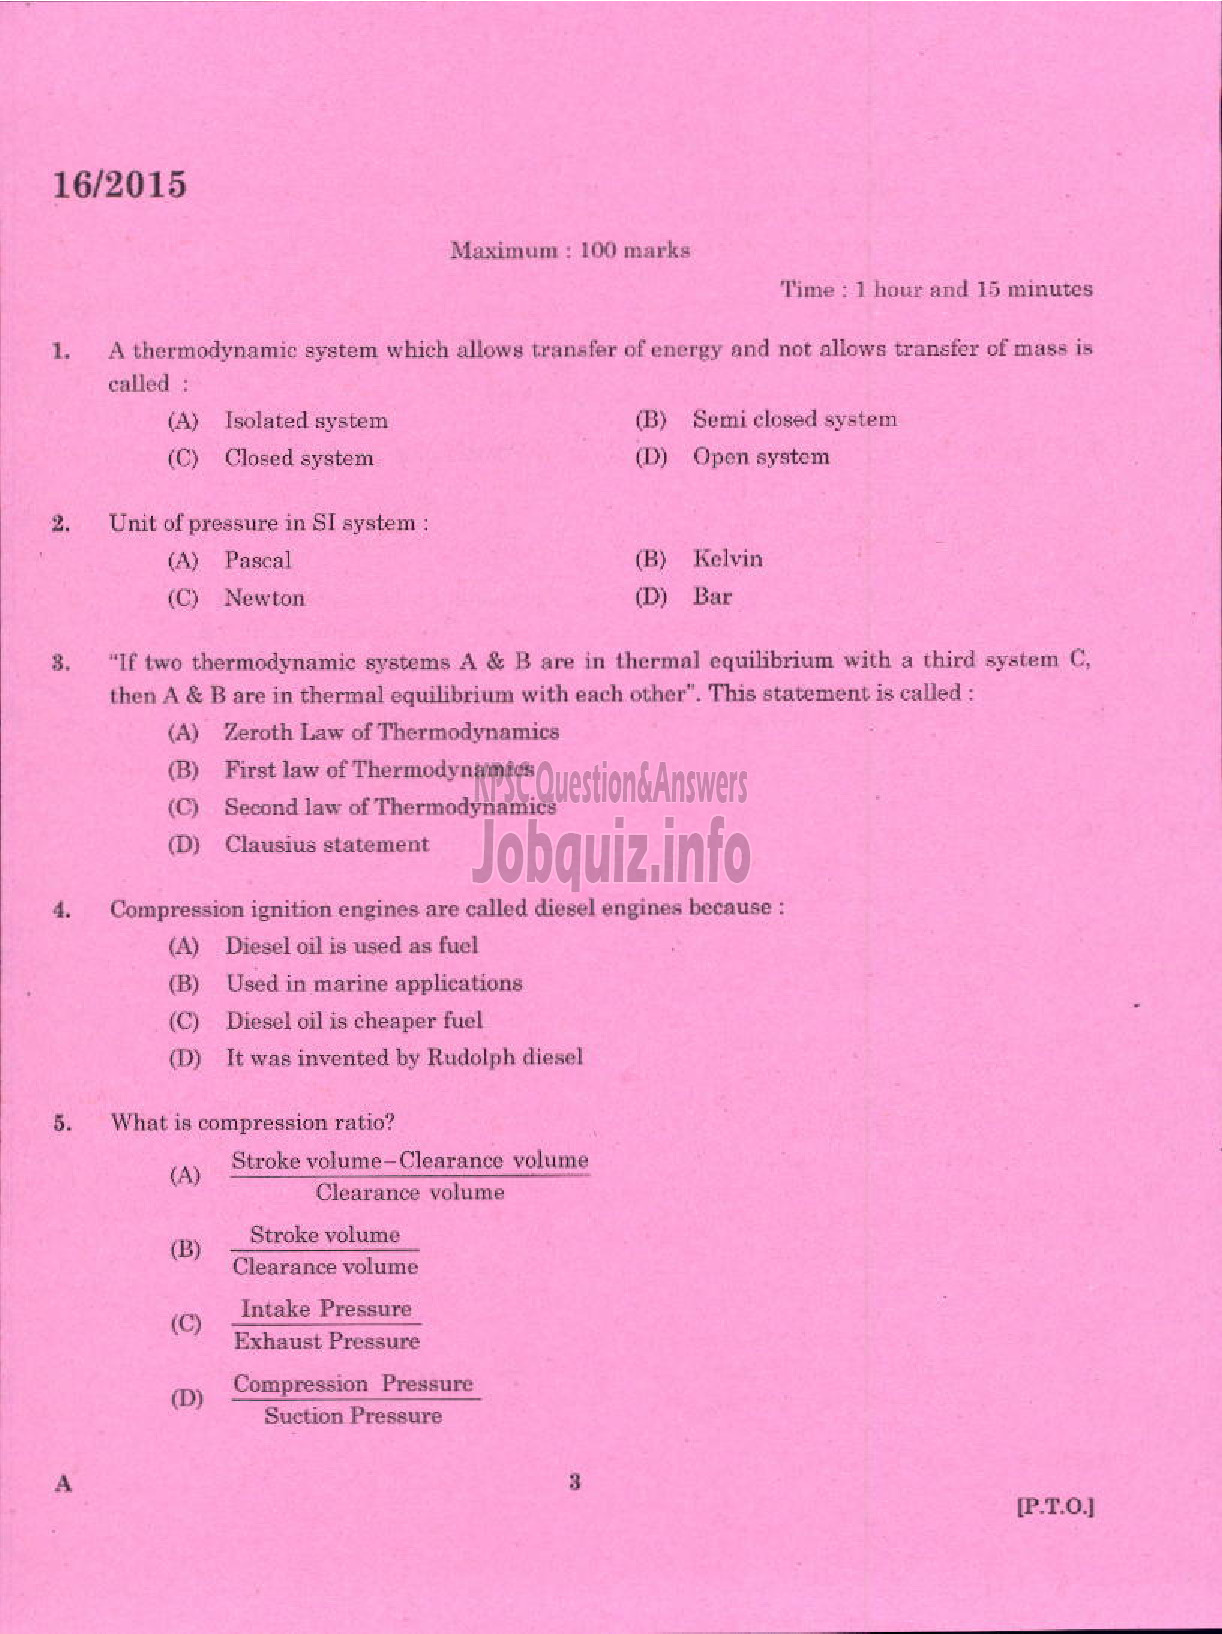 Kerala PSC Question Paper - LABORATORY TECHNICAL ASSISTANT MAINTENANCE AND OPERATION OF MARINE ENGINES VHSE-1